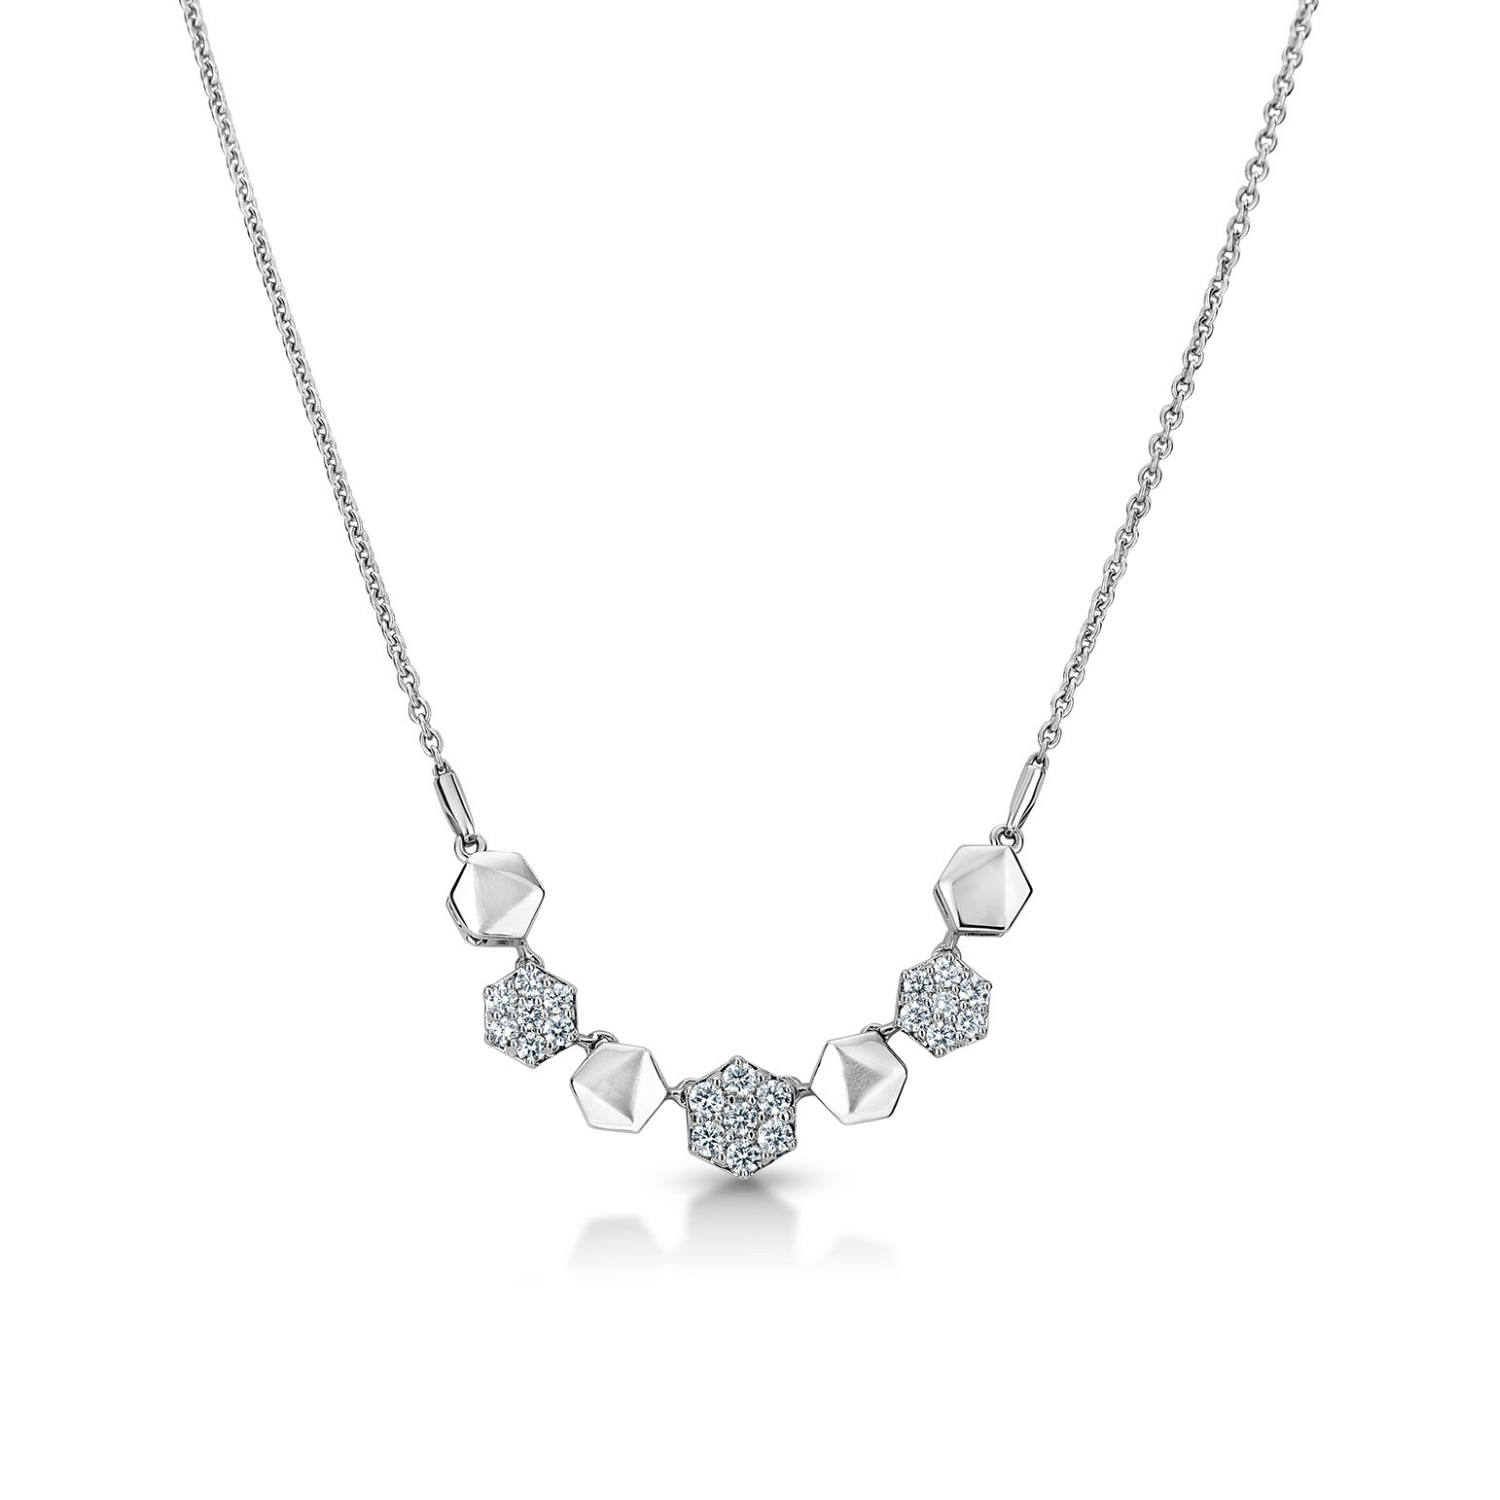 Chains Real Platinum Necklace Singapore Link 2.5mm Pure Platinum950 Stamp  Pt950 For Women Men 44cm Length Chain From Morriskitys, $302.23 | DHgate.Com